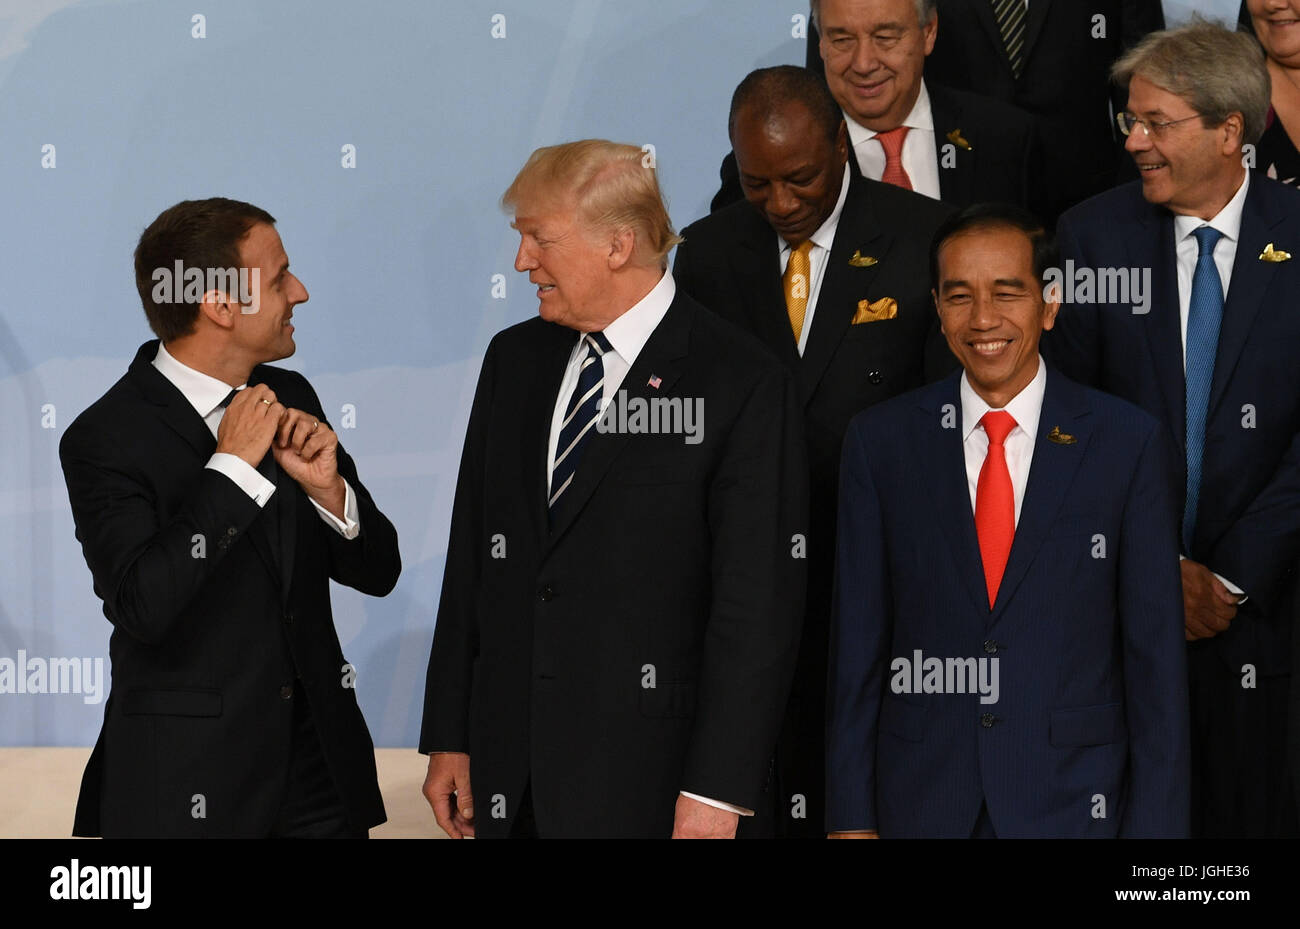 (Left to right) French President Emmanuel Macron, US President Donald Trump and Indonesian president Joko Widodo interact as world leaders pose for a family photo during the G20 summit in Hamburg. Stock Photo